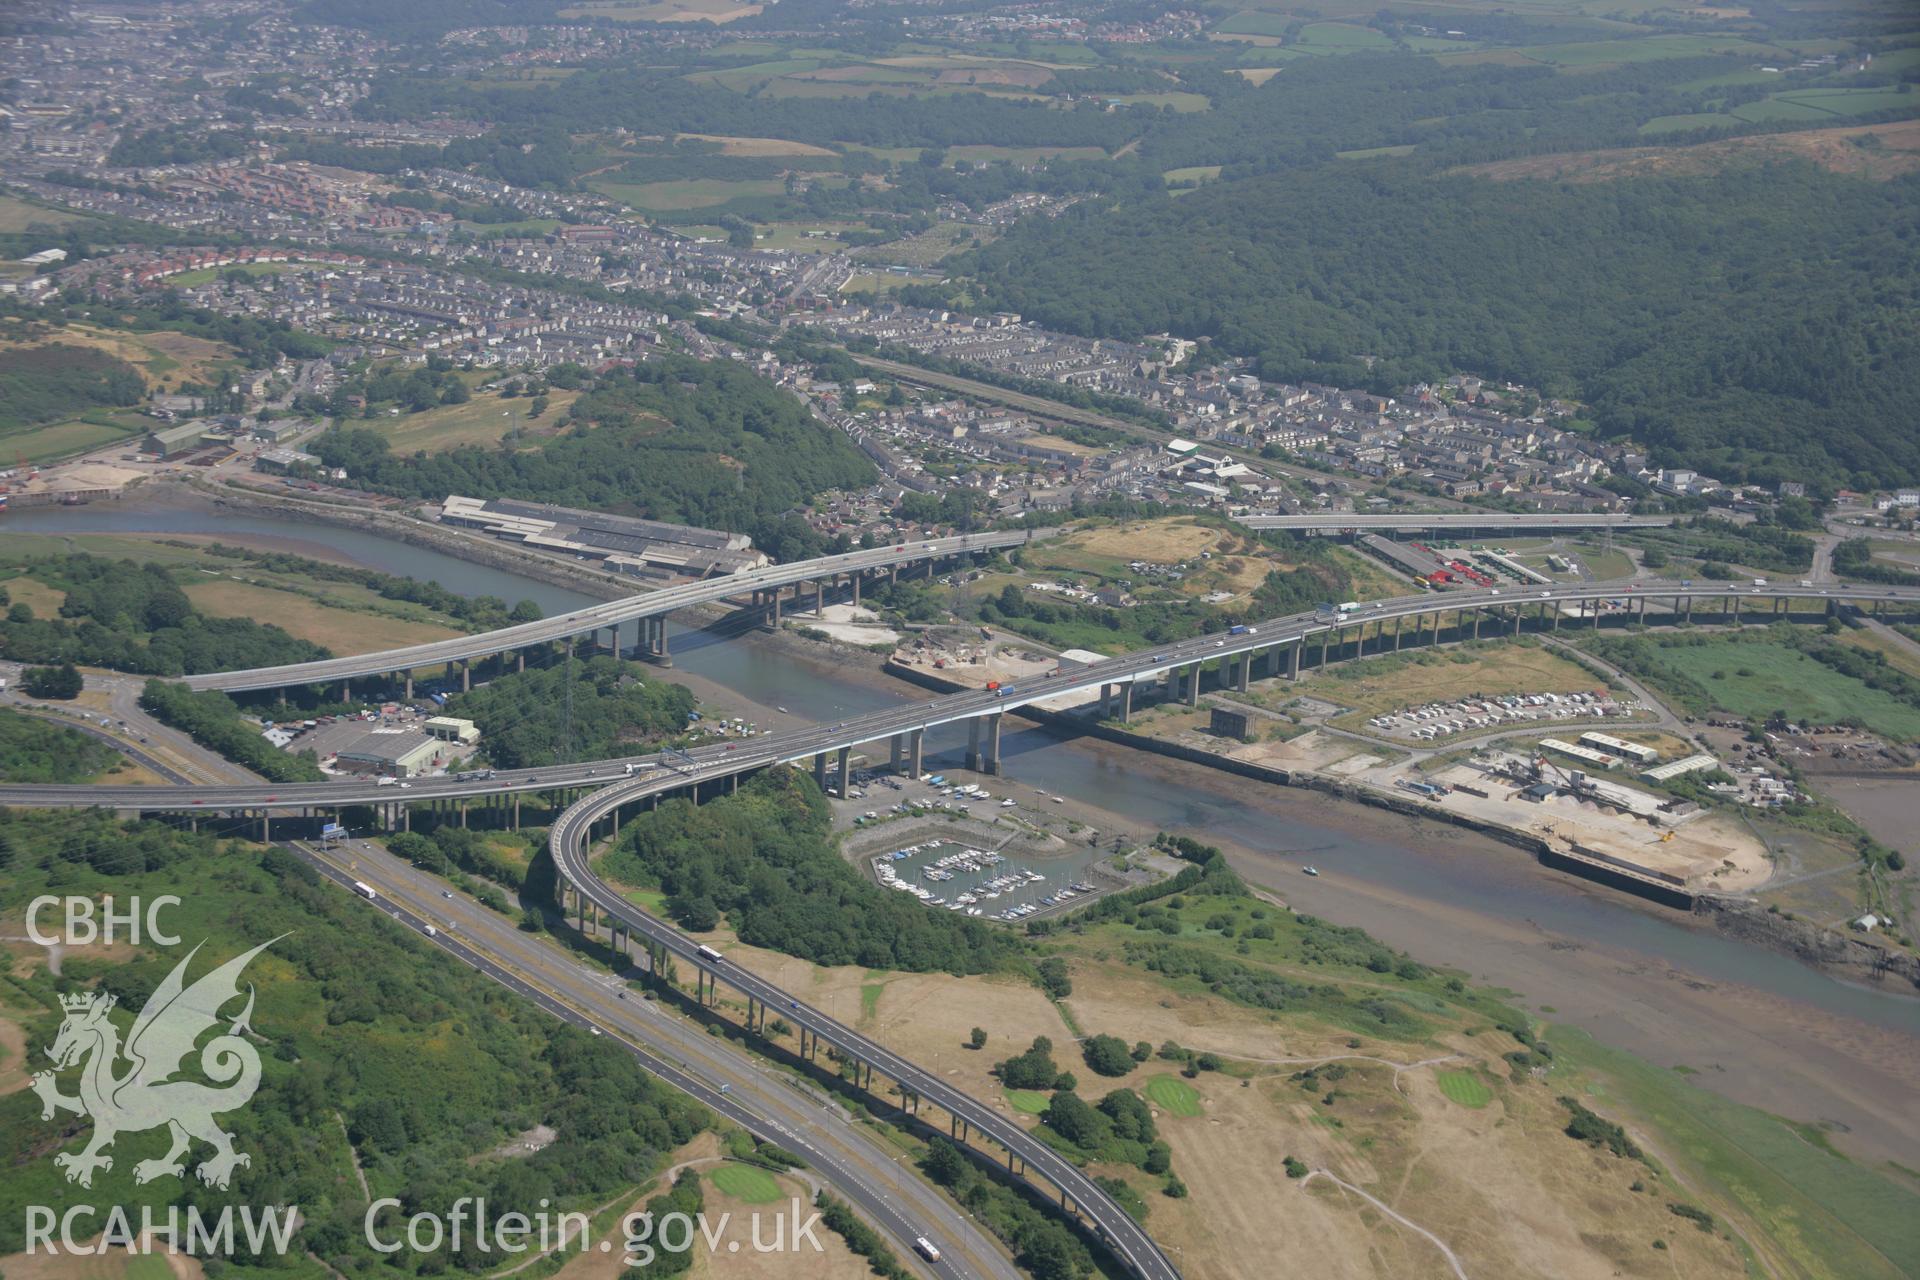 RCAHMW colour oblique aerial photograph of A48 Road Bridge over R.Neath, Briton Ferry. Taken on 24 July 2006 by Toby Driver.